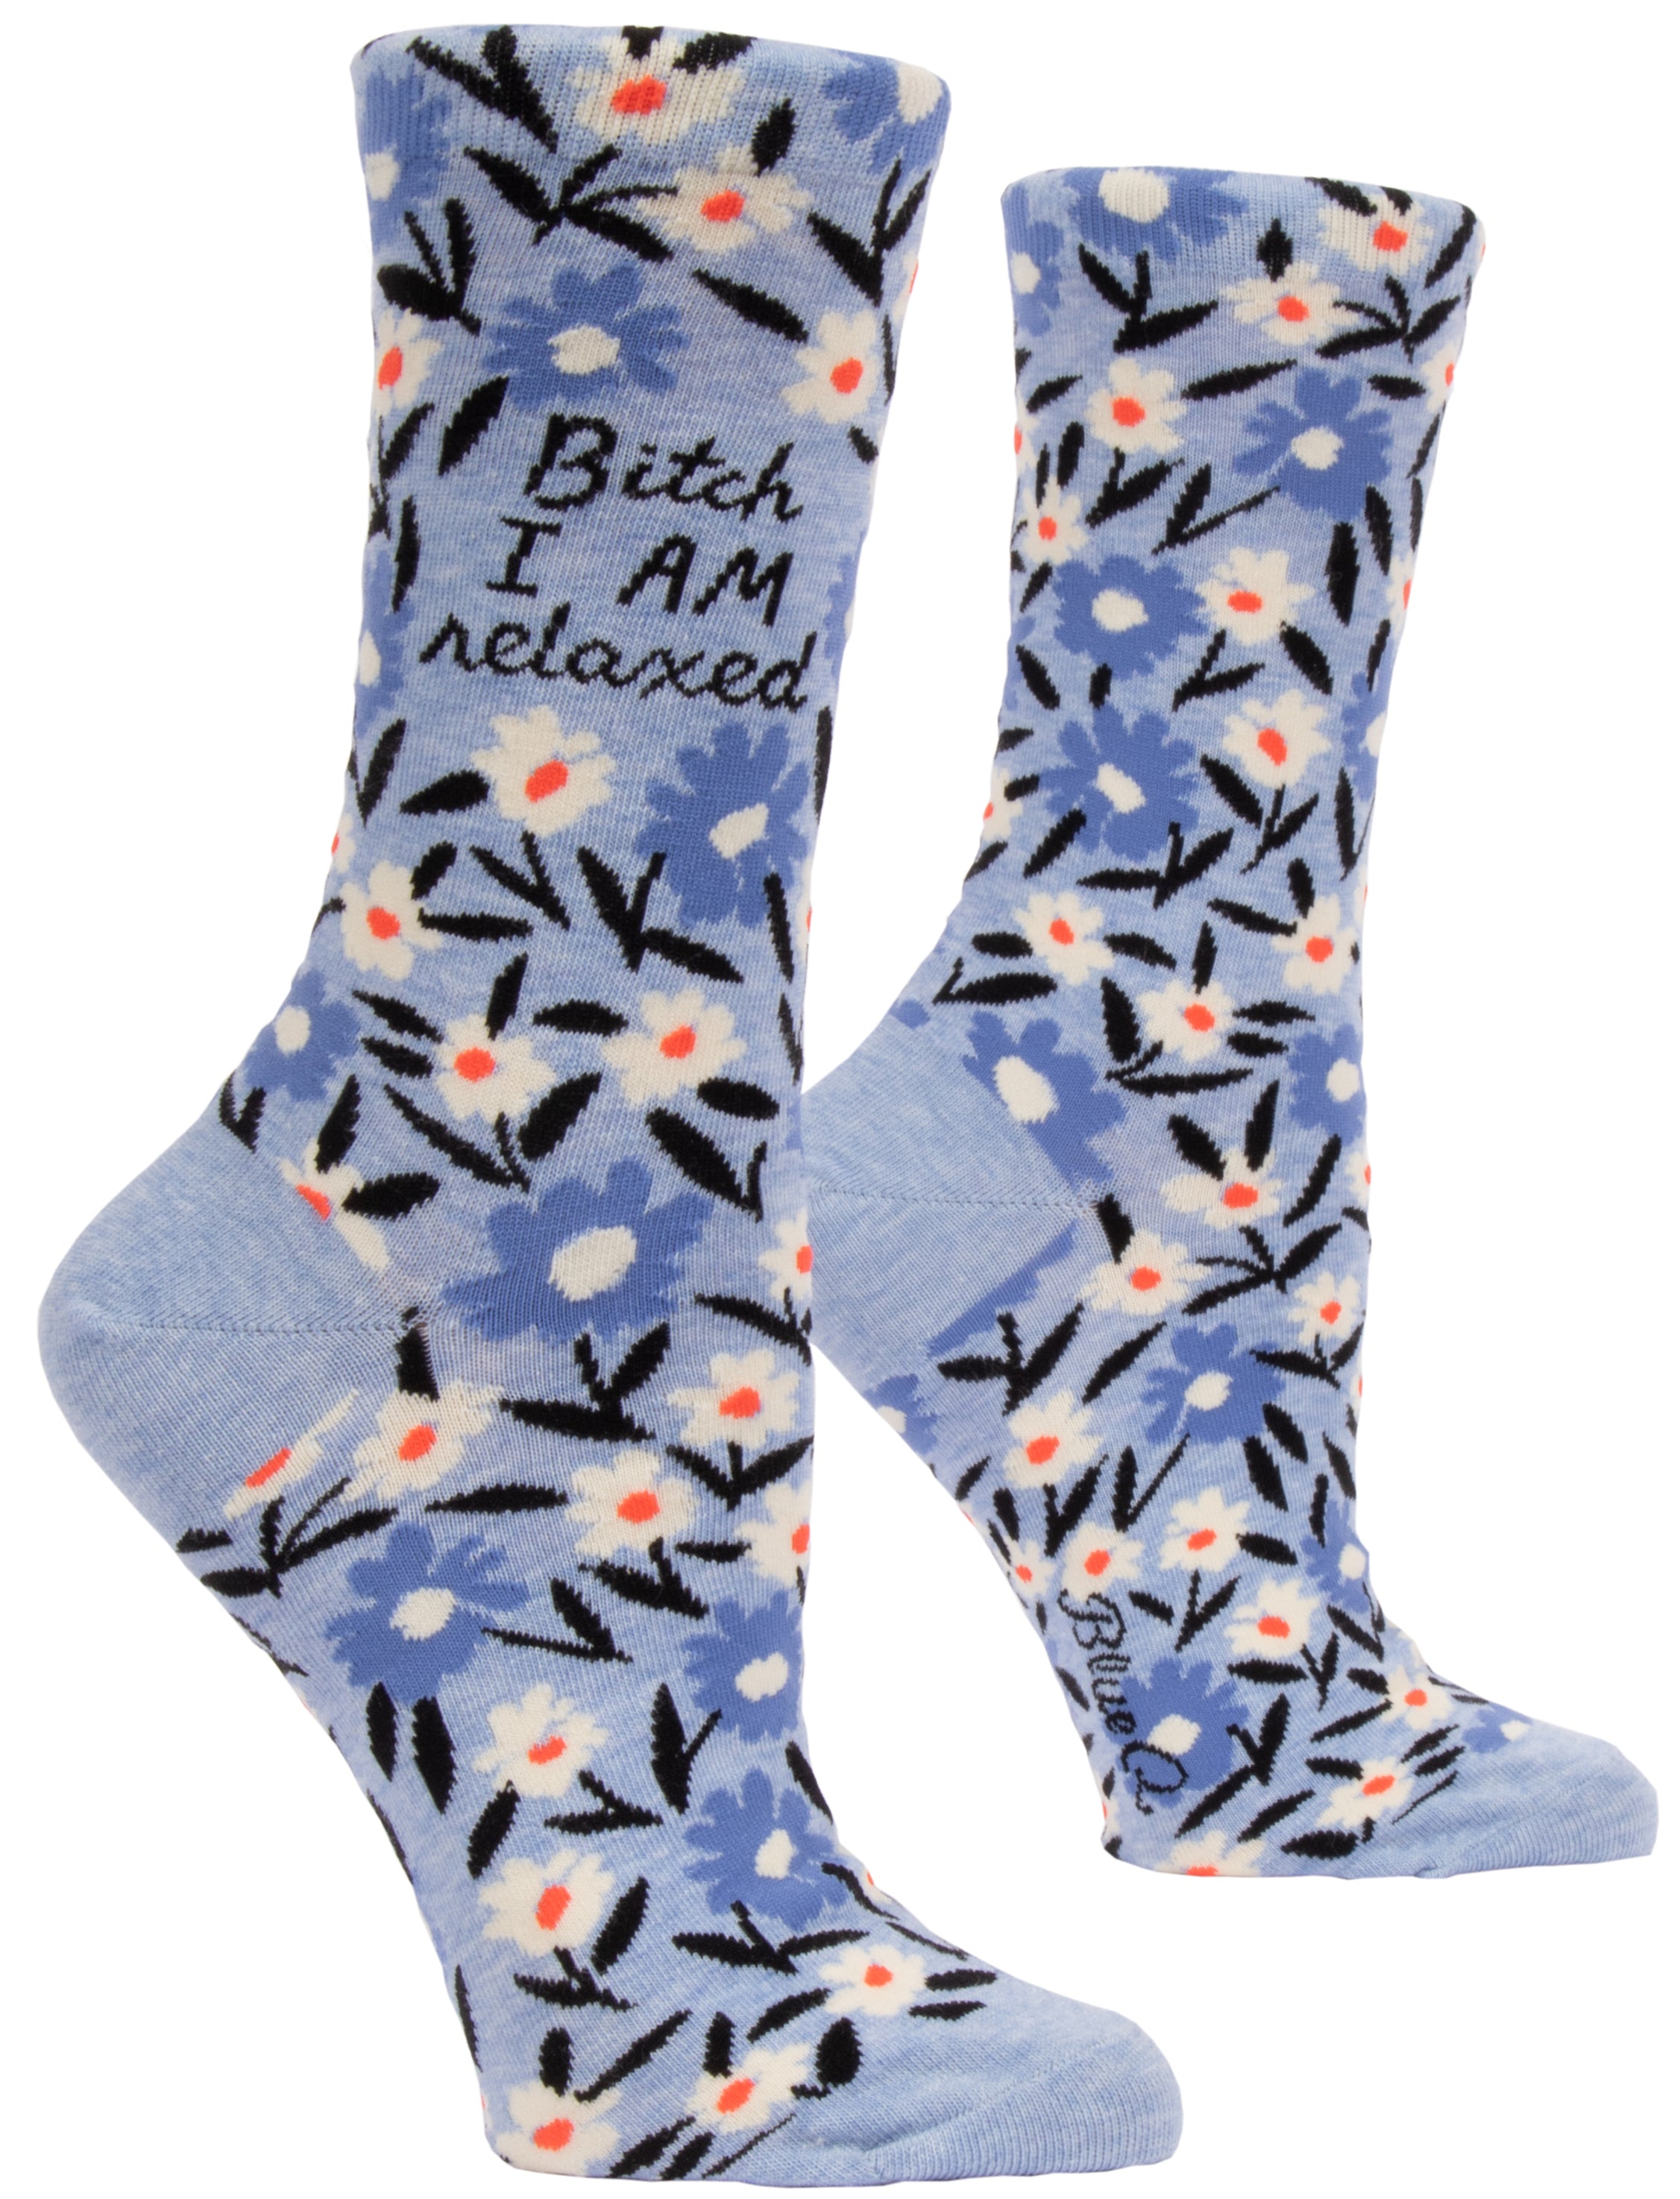 light blue socks with white and darker blue flowers and on ankle they say bitch i am relaxed